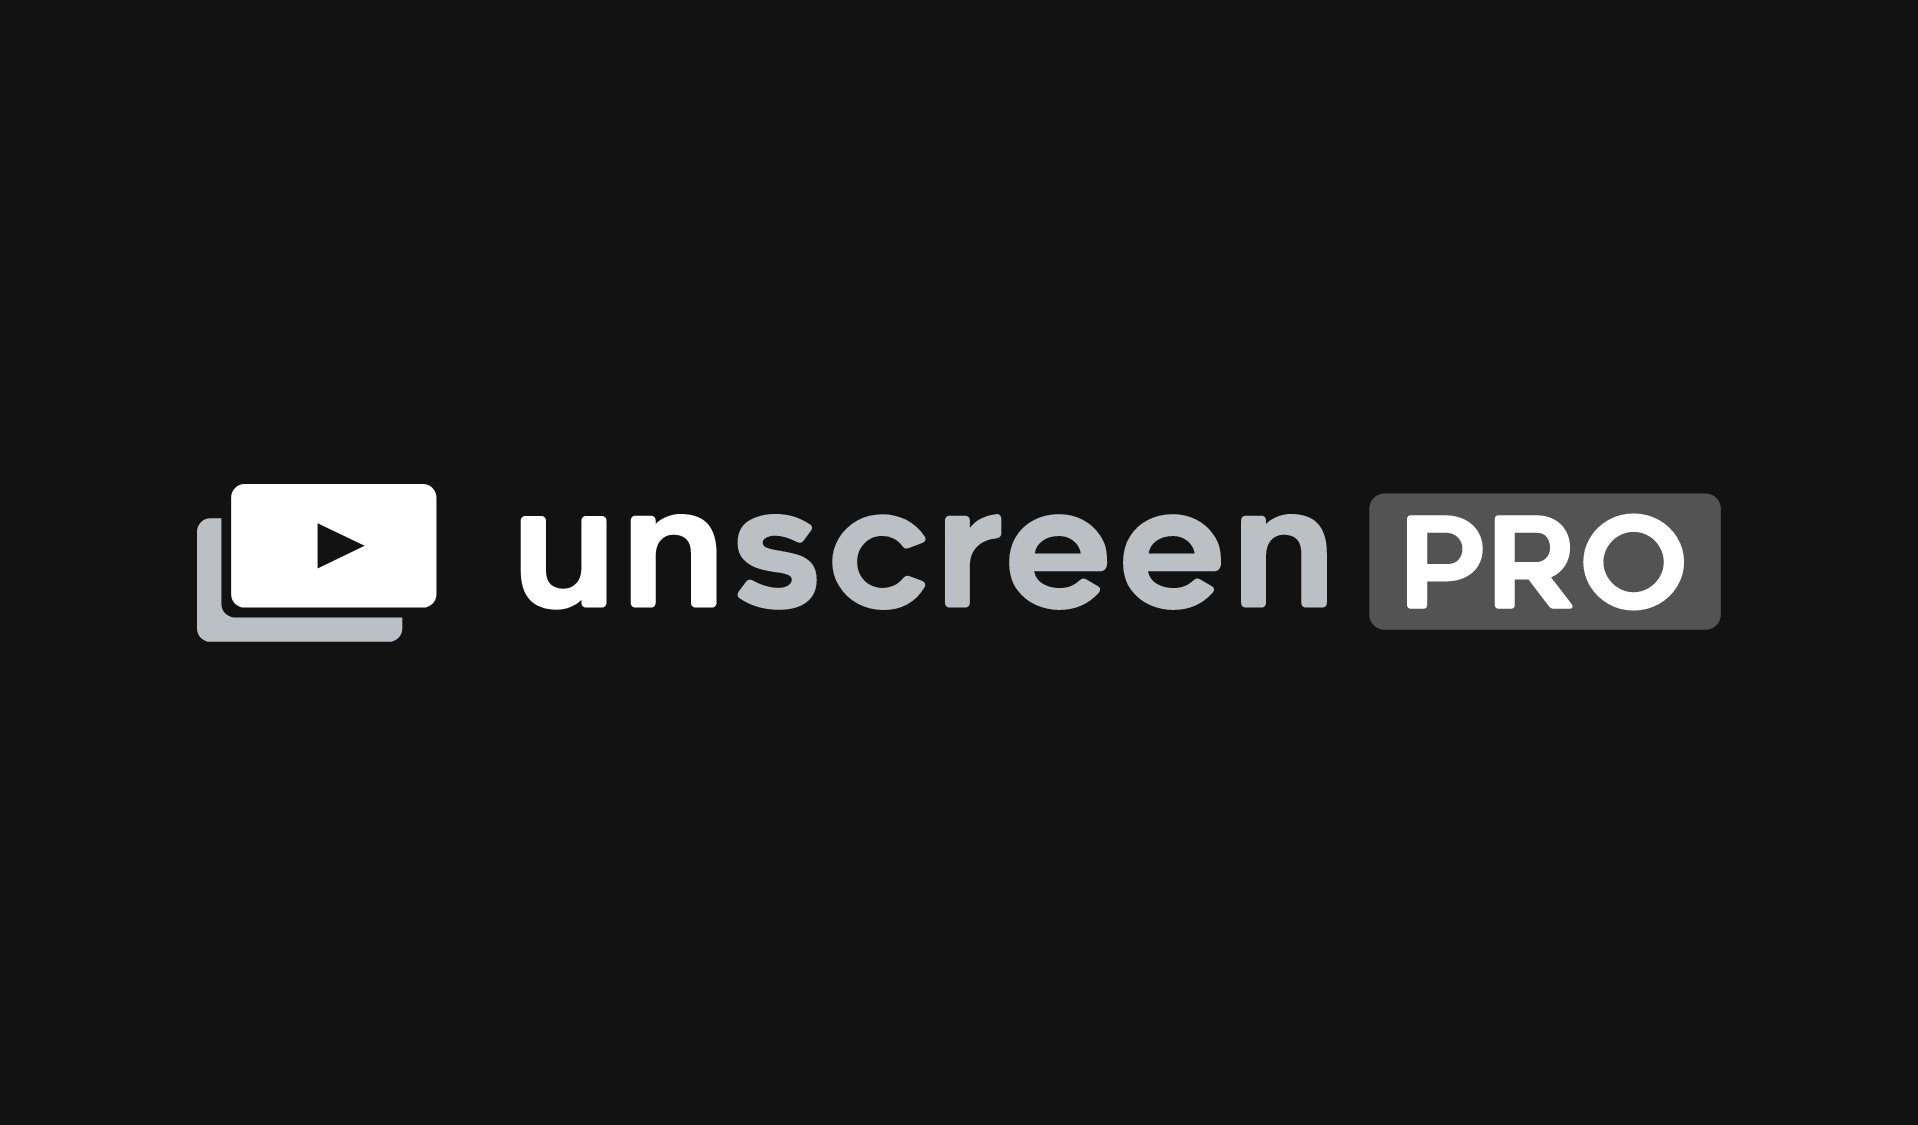 Unscreen Pro Product Hunt Image